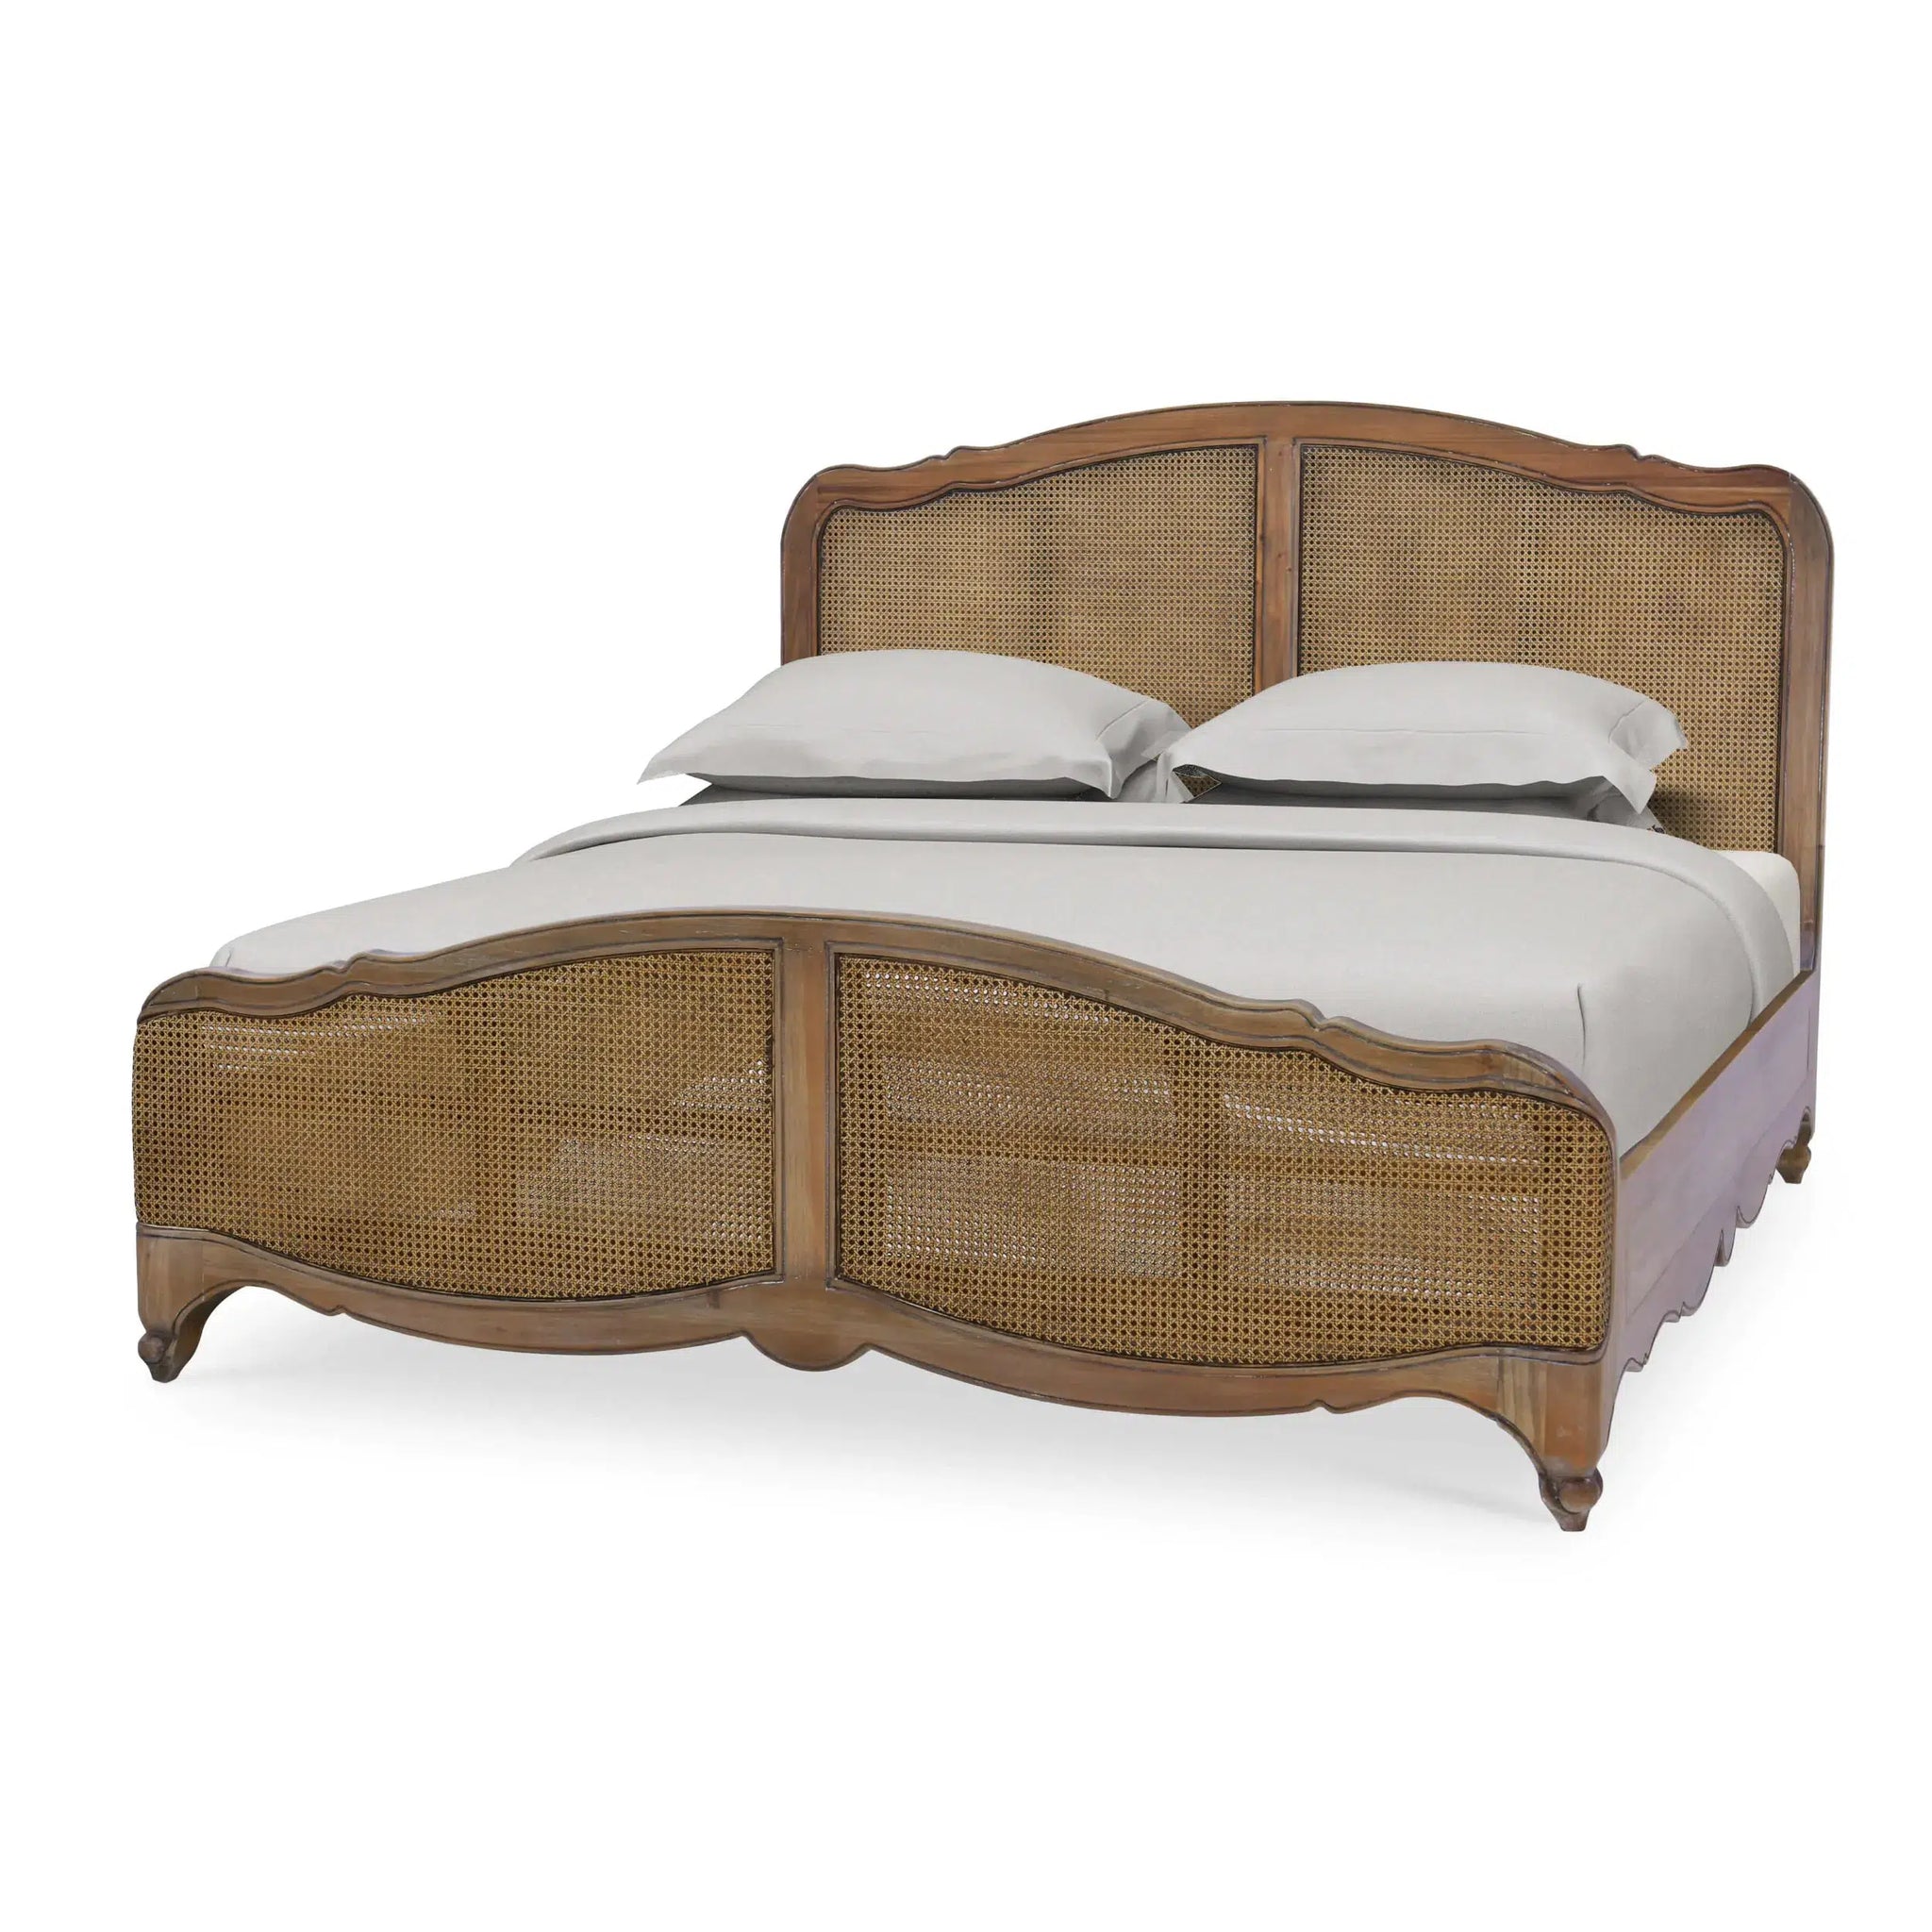 Covington Bed King In Straw Wash w/ Rattan Glaze-Blue Hand Home